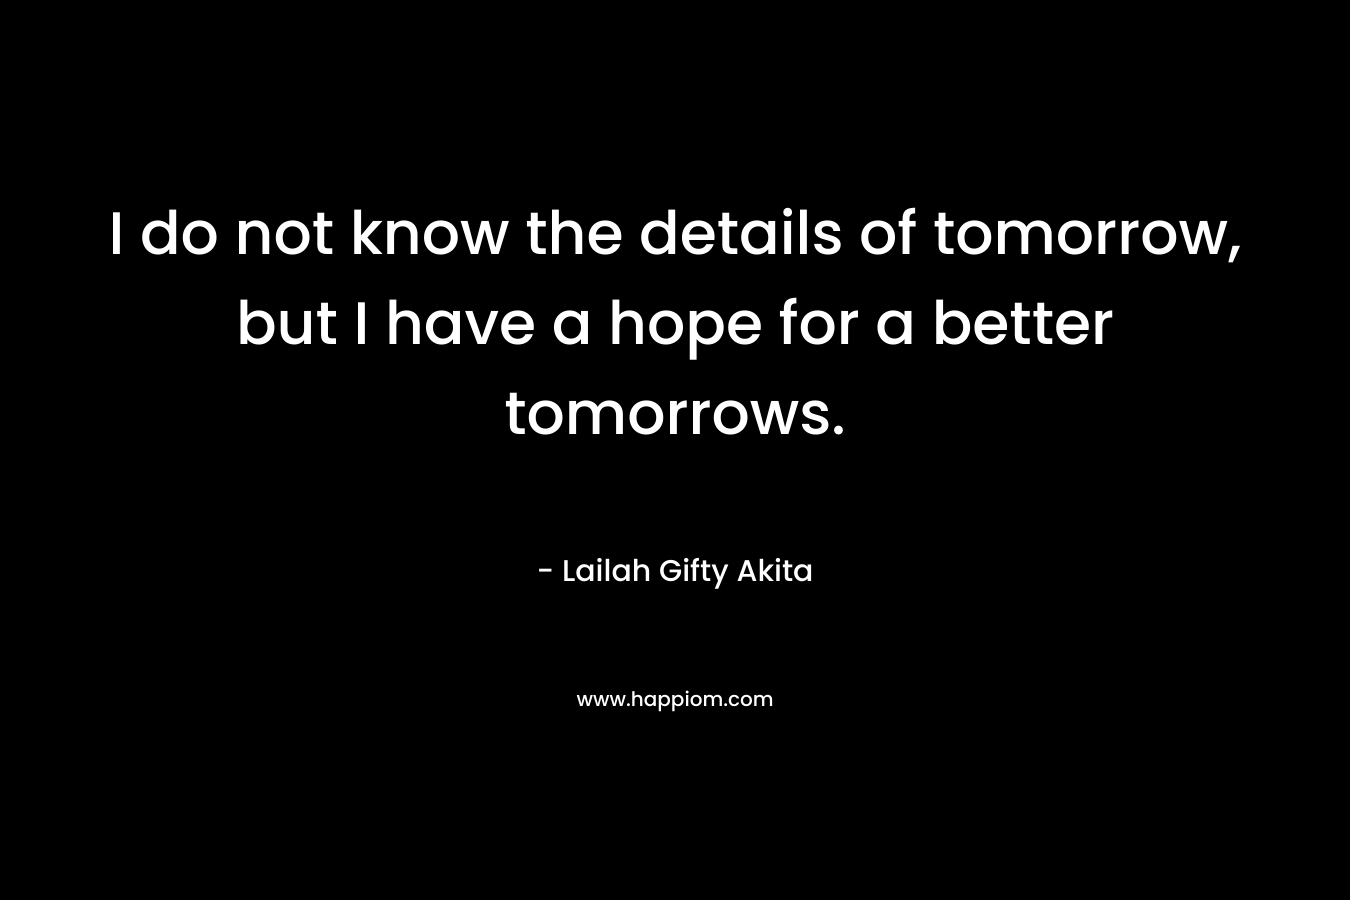 I do not know the details of tomorrow, but I have a hope for a better tomorrows. – Lailah Gifty Akita